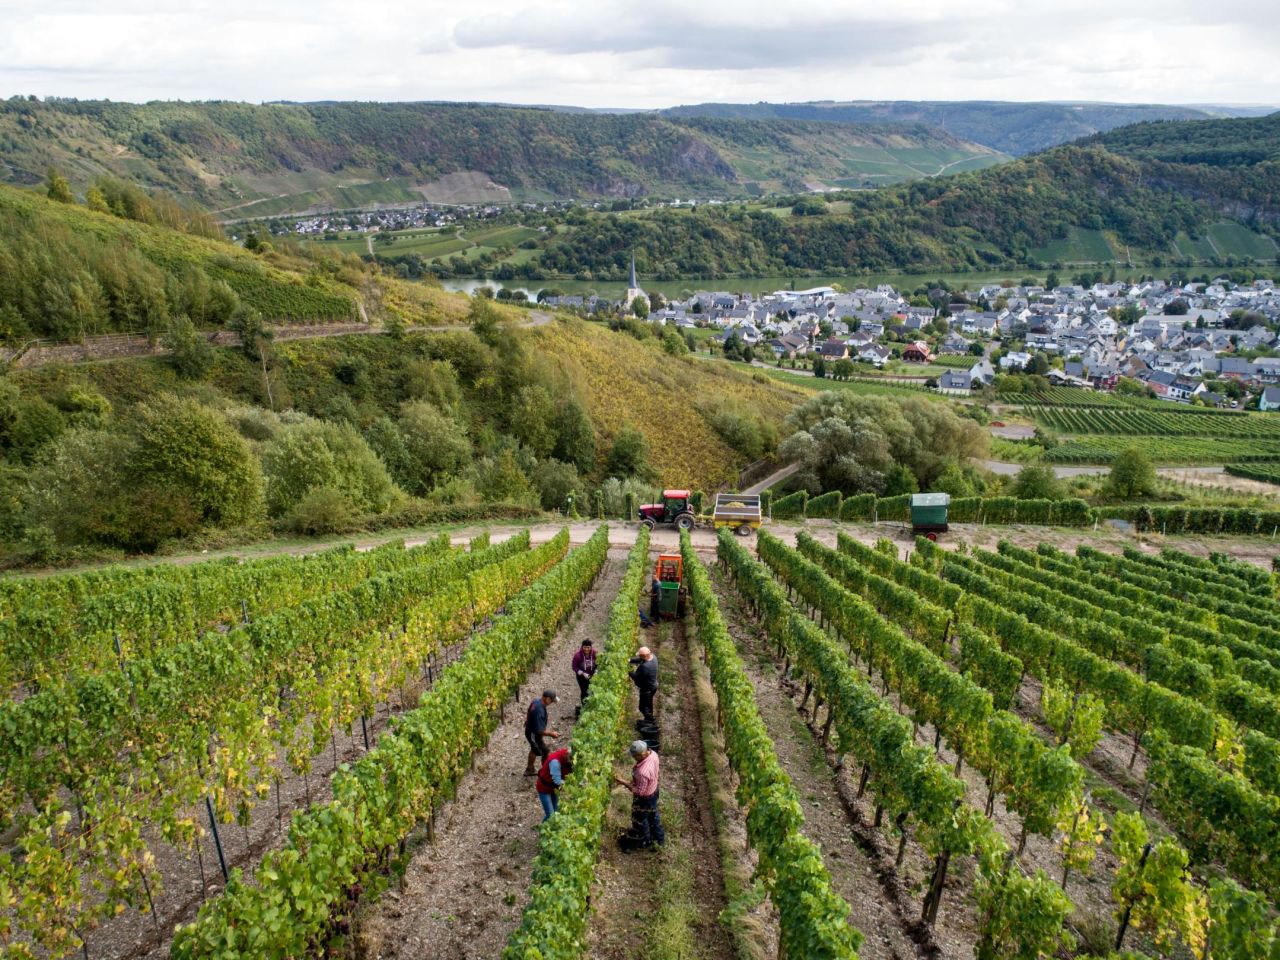 <strong>The Mosel Valley:</strong> The Mosel Valley boasts some of the most scenic attractions and finest vineyards in Germany. A few standouts in this lush region include the medieval Eltz Castle, the vertiginous town of Cochem and Trier, the oldest city in the country.